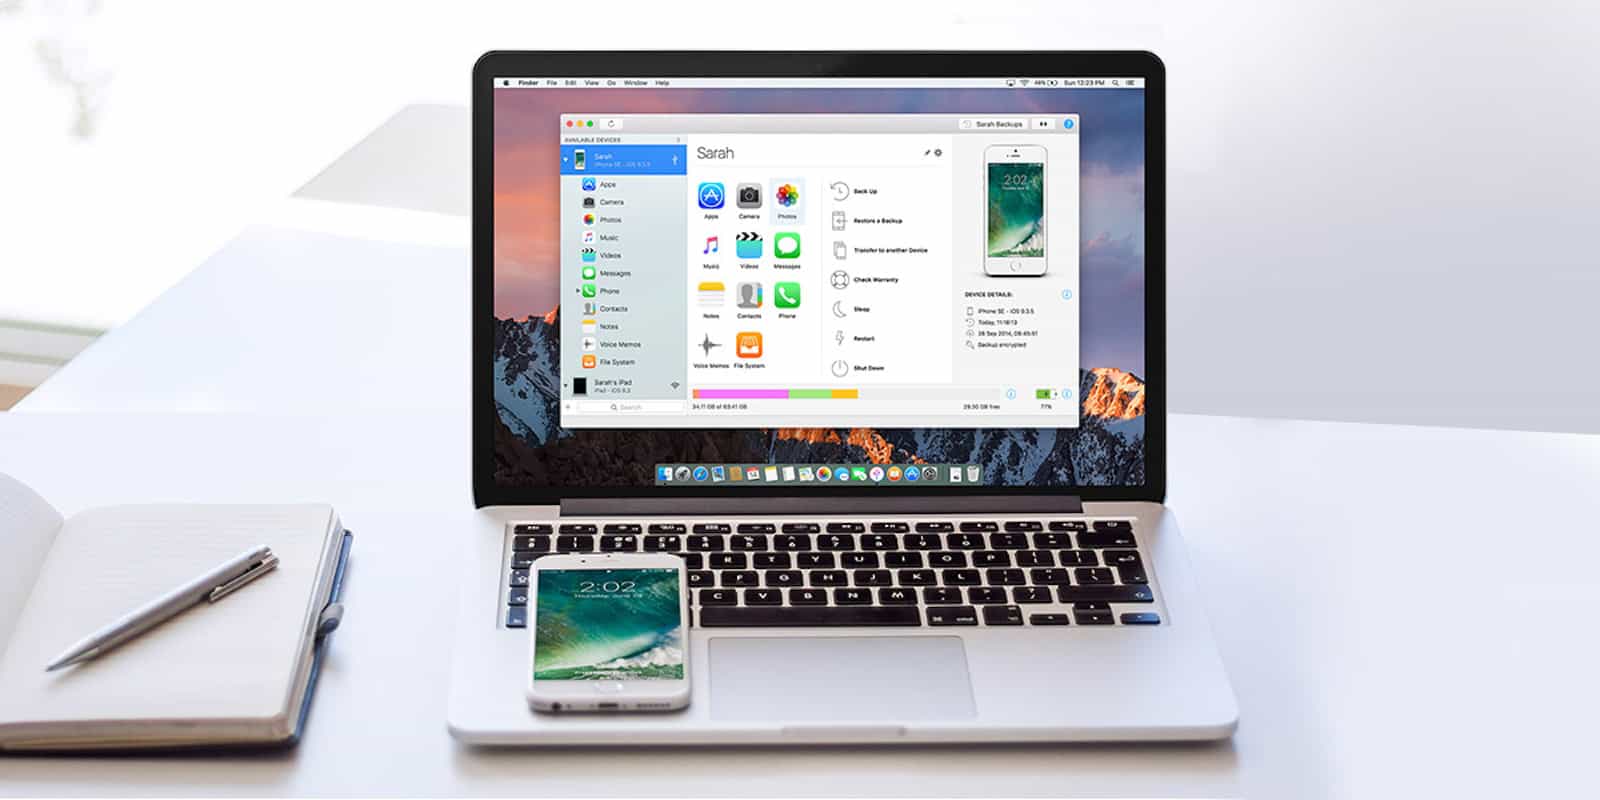 This iOS manager offers a lot more flexibility and ease of use than iTunes.